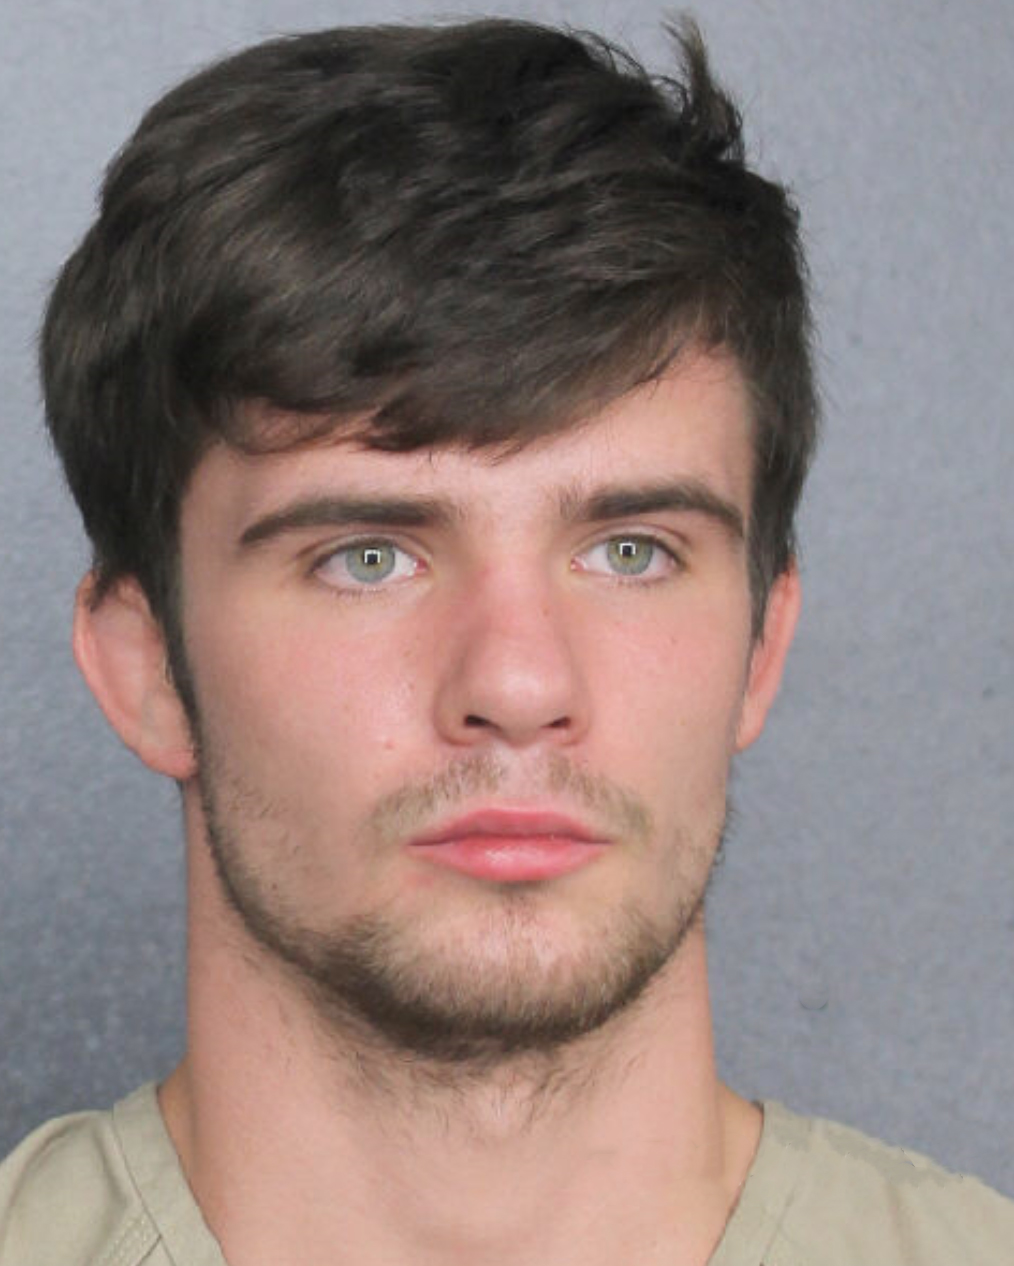 Coral Springs Man Arrested After Attempting To Enter Multiple Homes